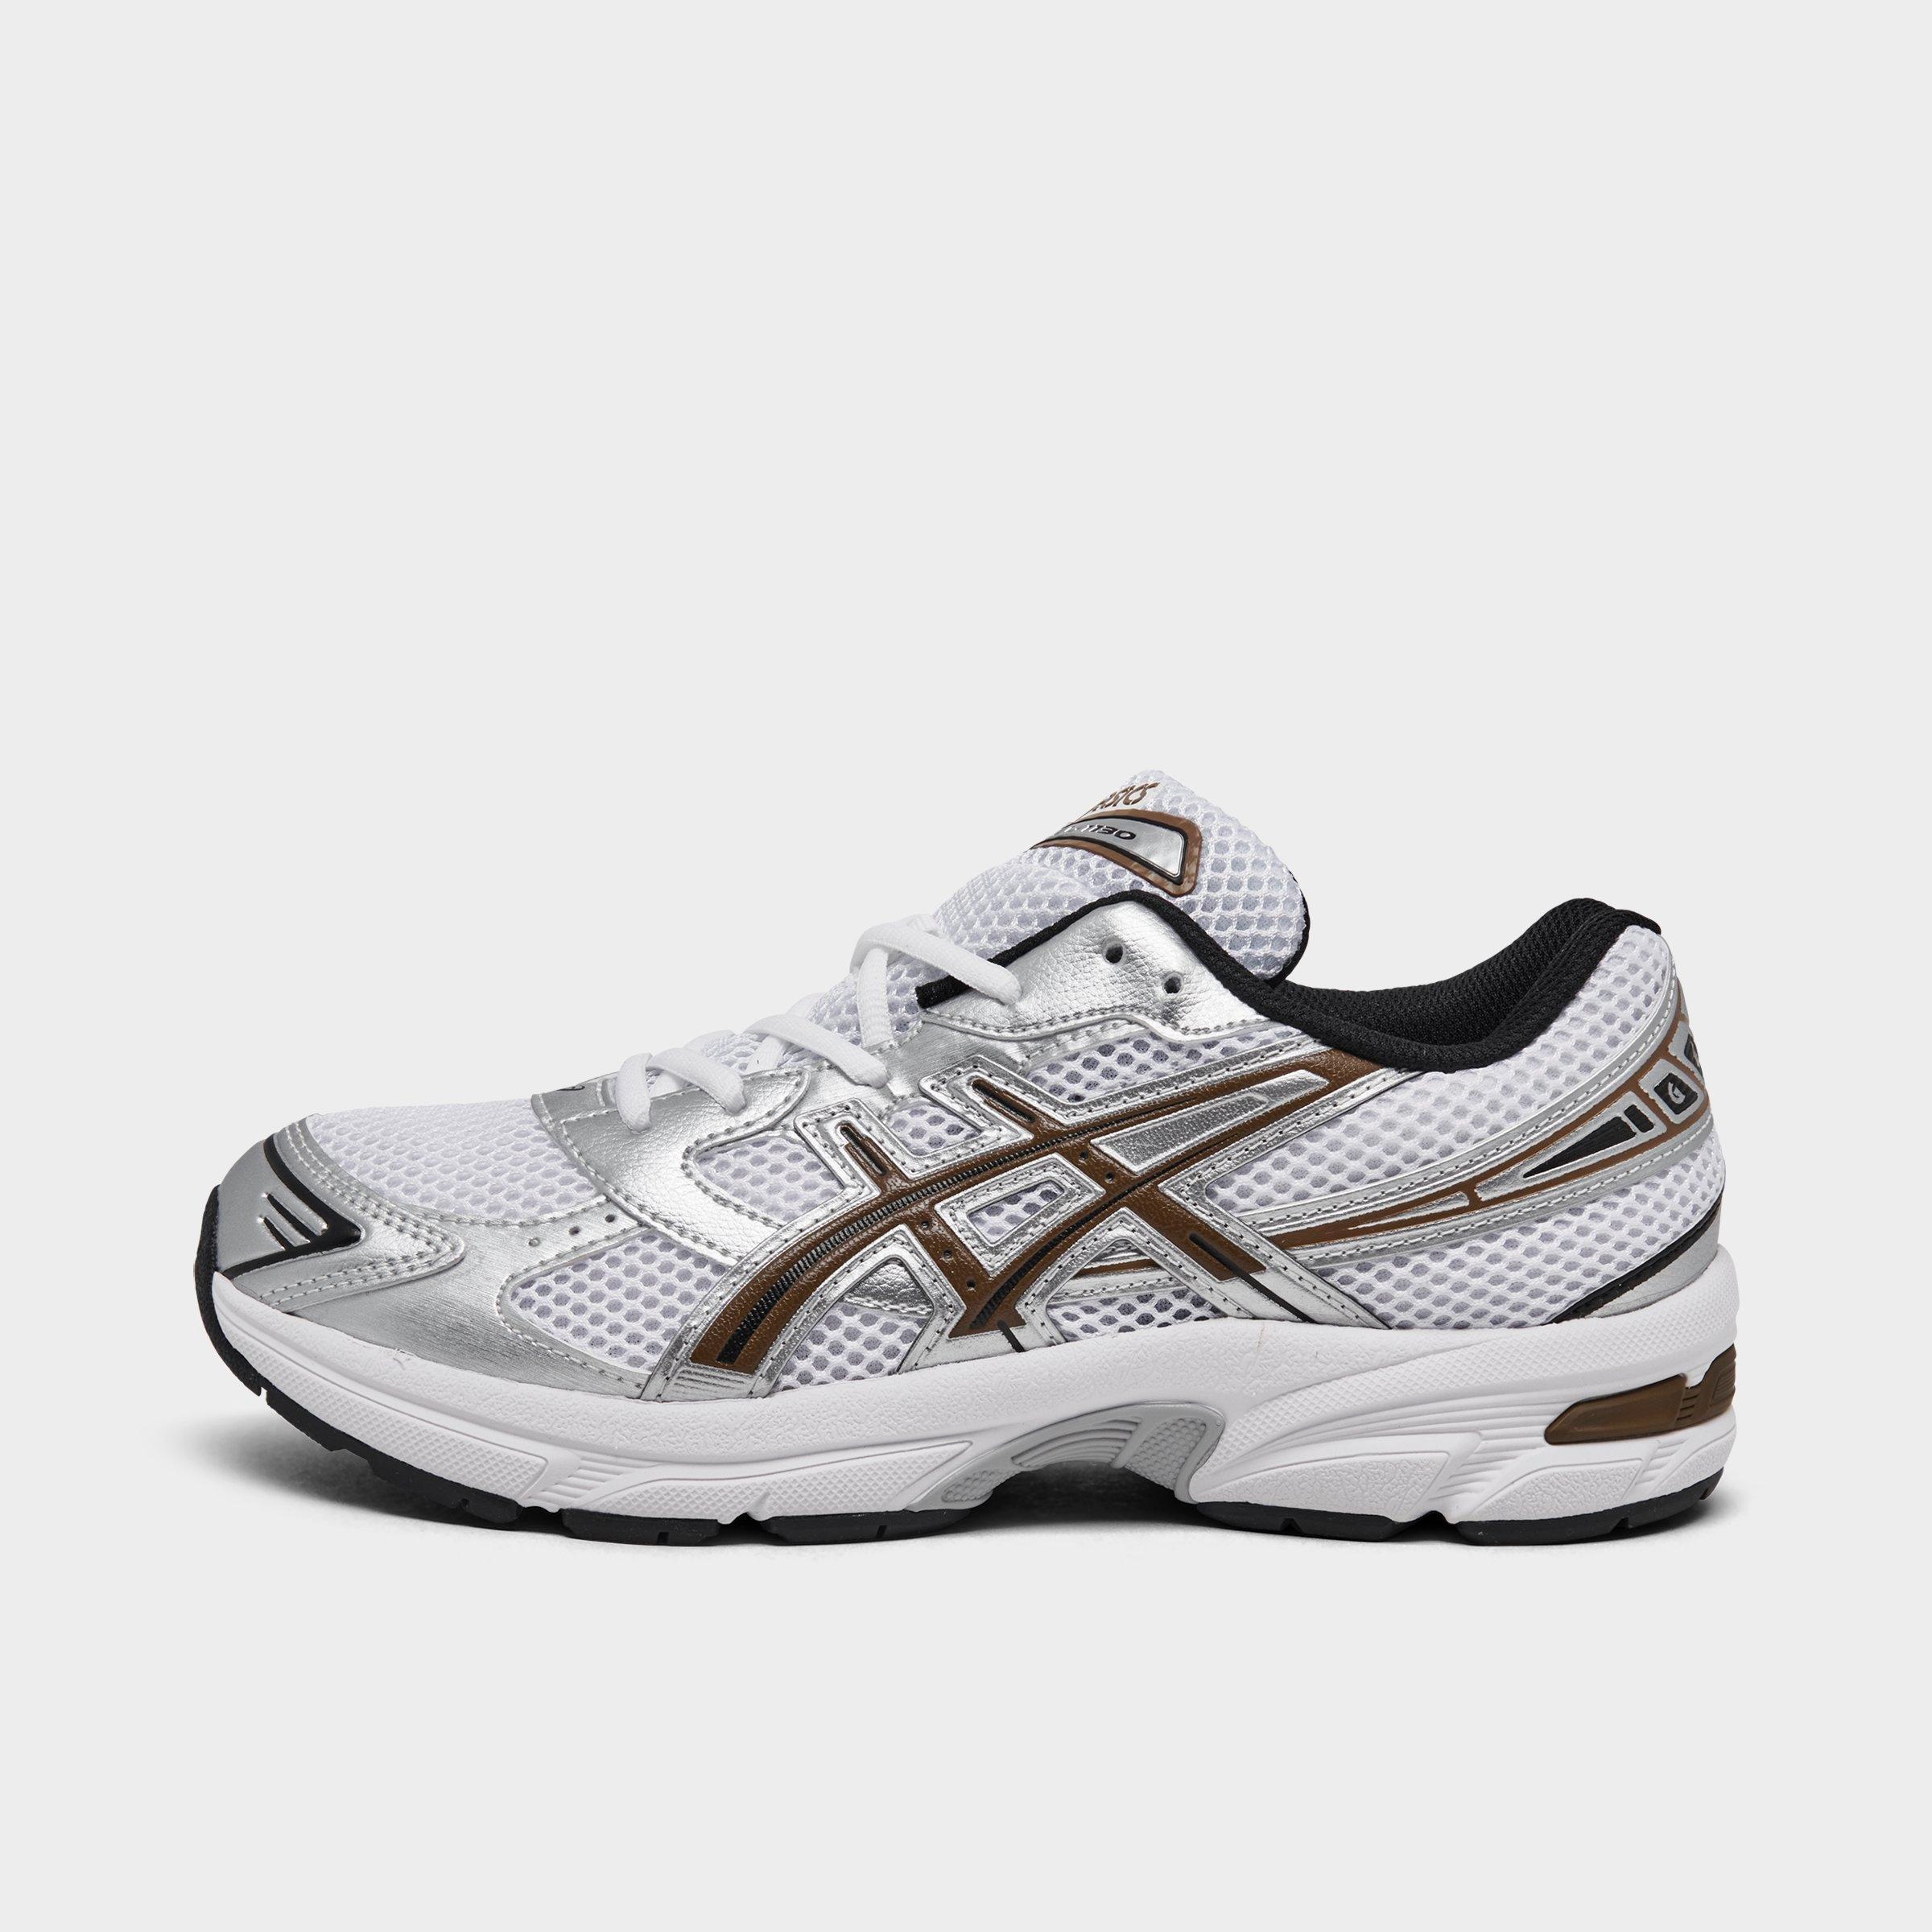 ASICS Shoes & Casual Sneakers | JD Sports